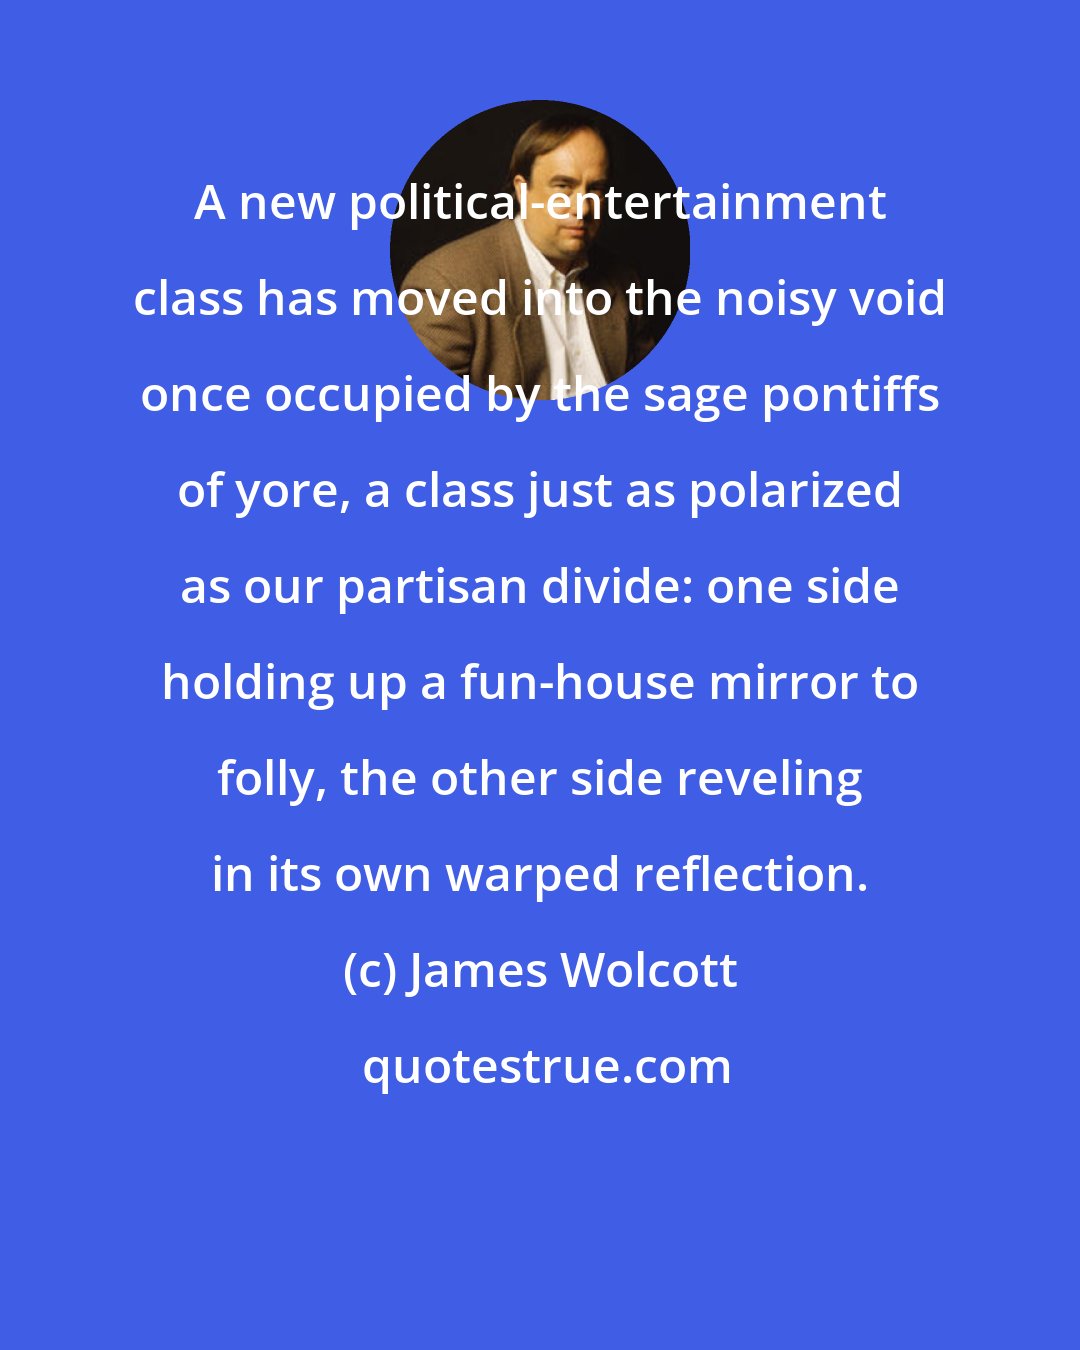 James Wolcott: A new political-entertainment class has moved into the noisy void once occupied by the sage pontiffs of yore, a class just as polarized as our partisan divide: one side holding up a fun-house mirror to folly, the other side reveling in its own warped reflection.